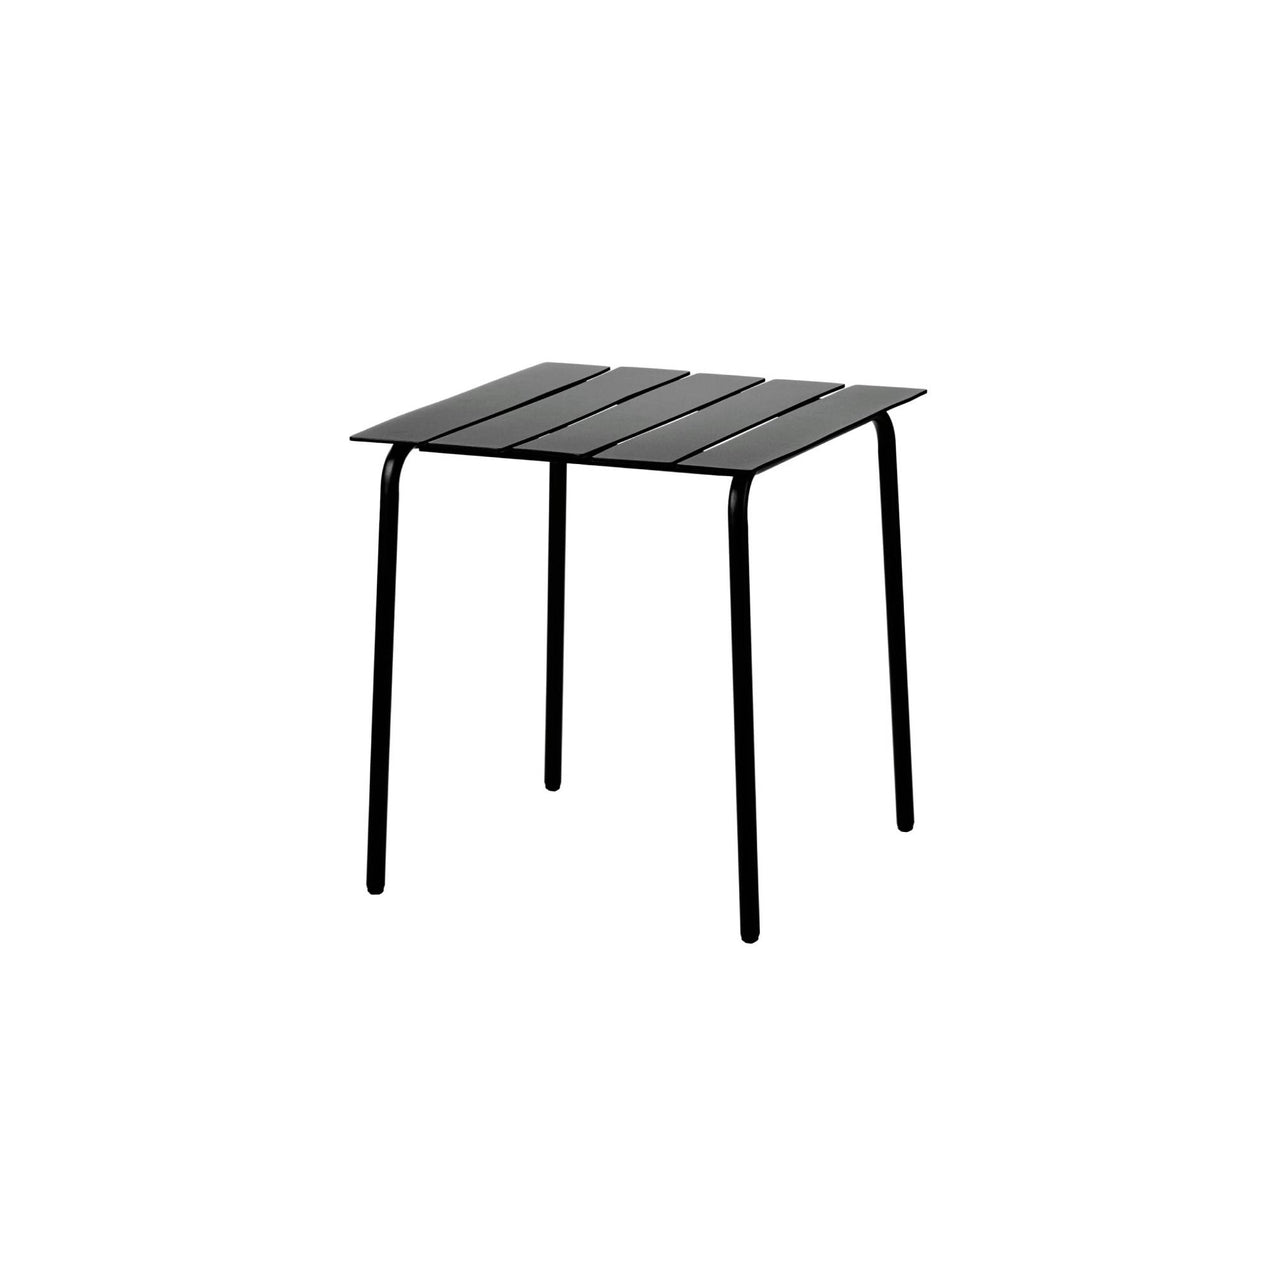 Aligned Outdoor Dining Table: Square + Black